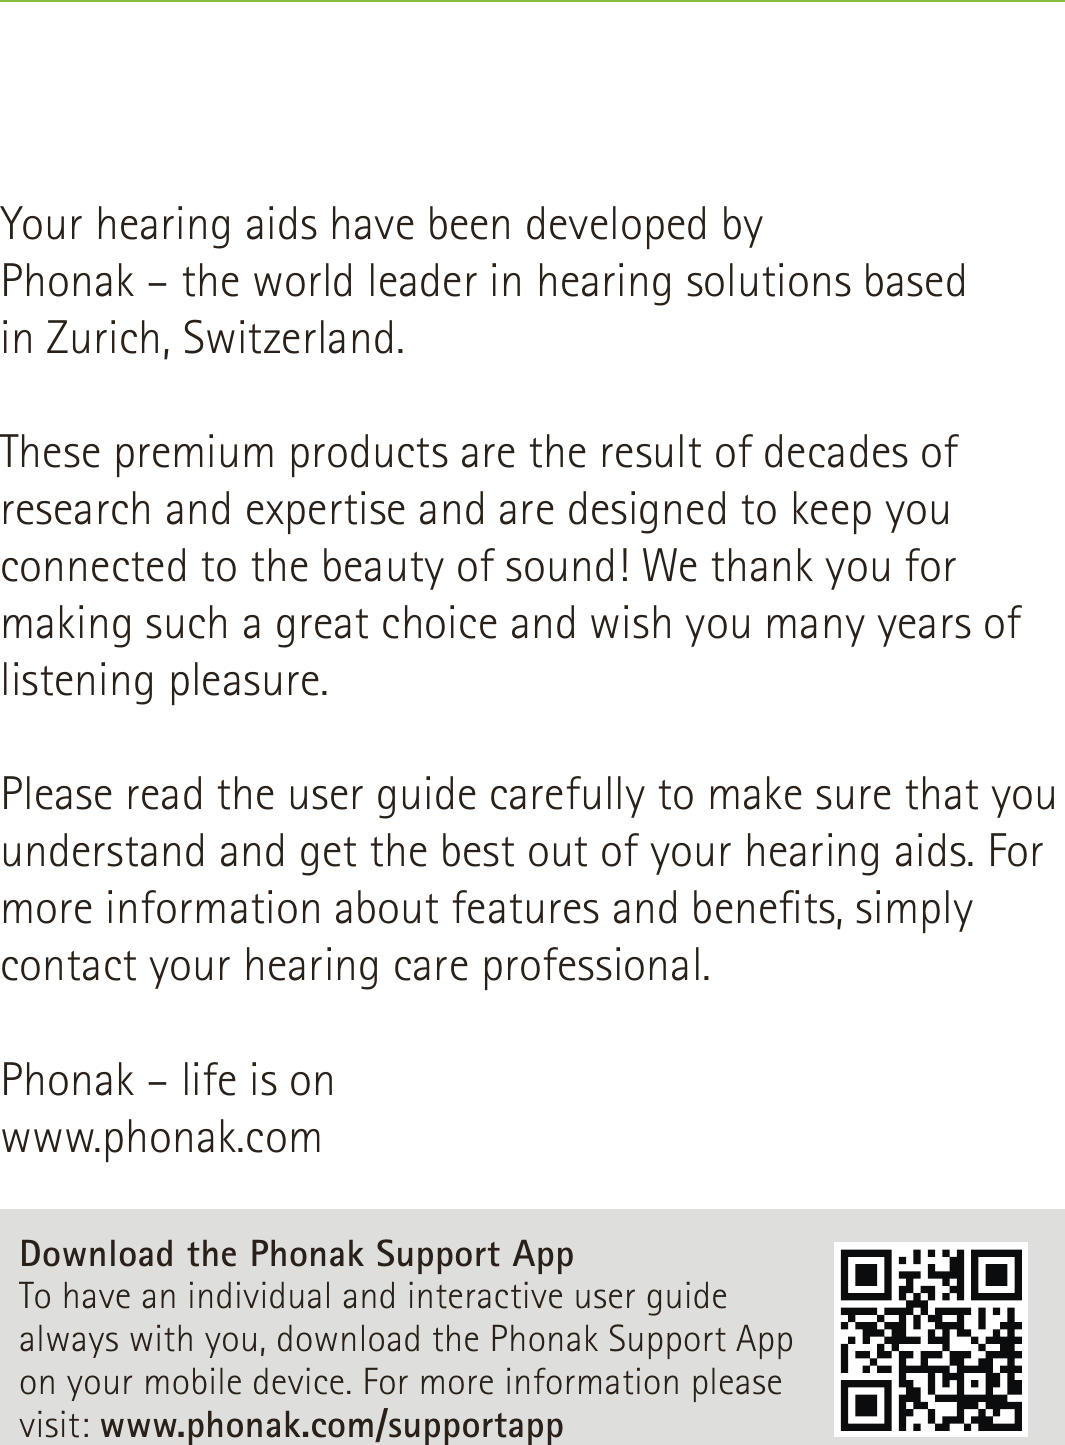 Your hearing aids have been developed by  Phonak – the world leader in hearing solutions based  in Zurich, Switzerland. These premium products are the result of decades of research and expertise and are designed to keep you connected to the beauty of sound! We thank you for making such a great choice and wish you many years of listening pleasure. Please read the user guide carefully to make sure that you understand and get the best out of your hearing aids. For more information about features and benets, simply contact your hearing care professional.Phonak – life is onwww.phonak.comDownload the Phonak Support App To have an individual and interactive user guide always with you, download the Phonak Support App on your mobile device. For more information please visit: www.phonak.com/supportapp